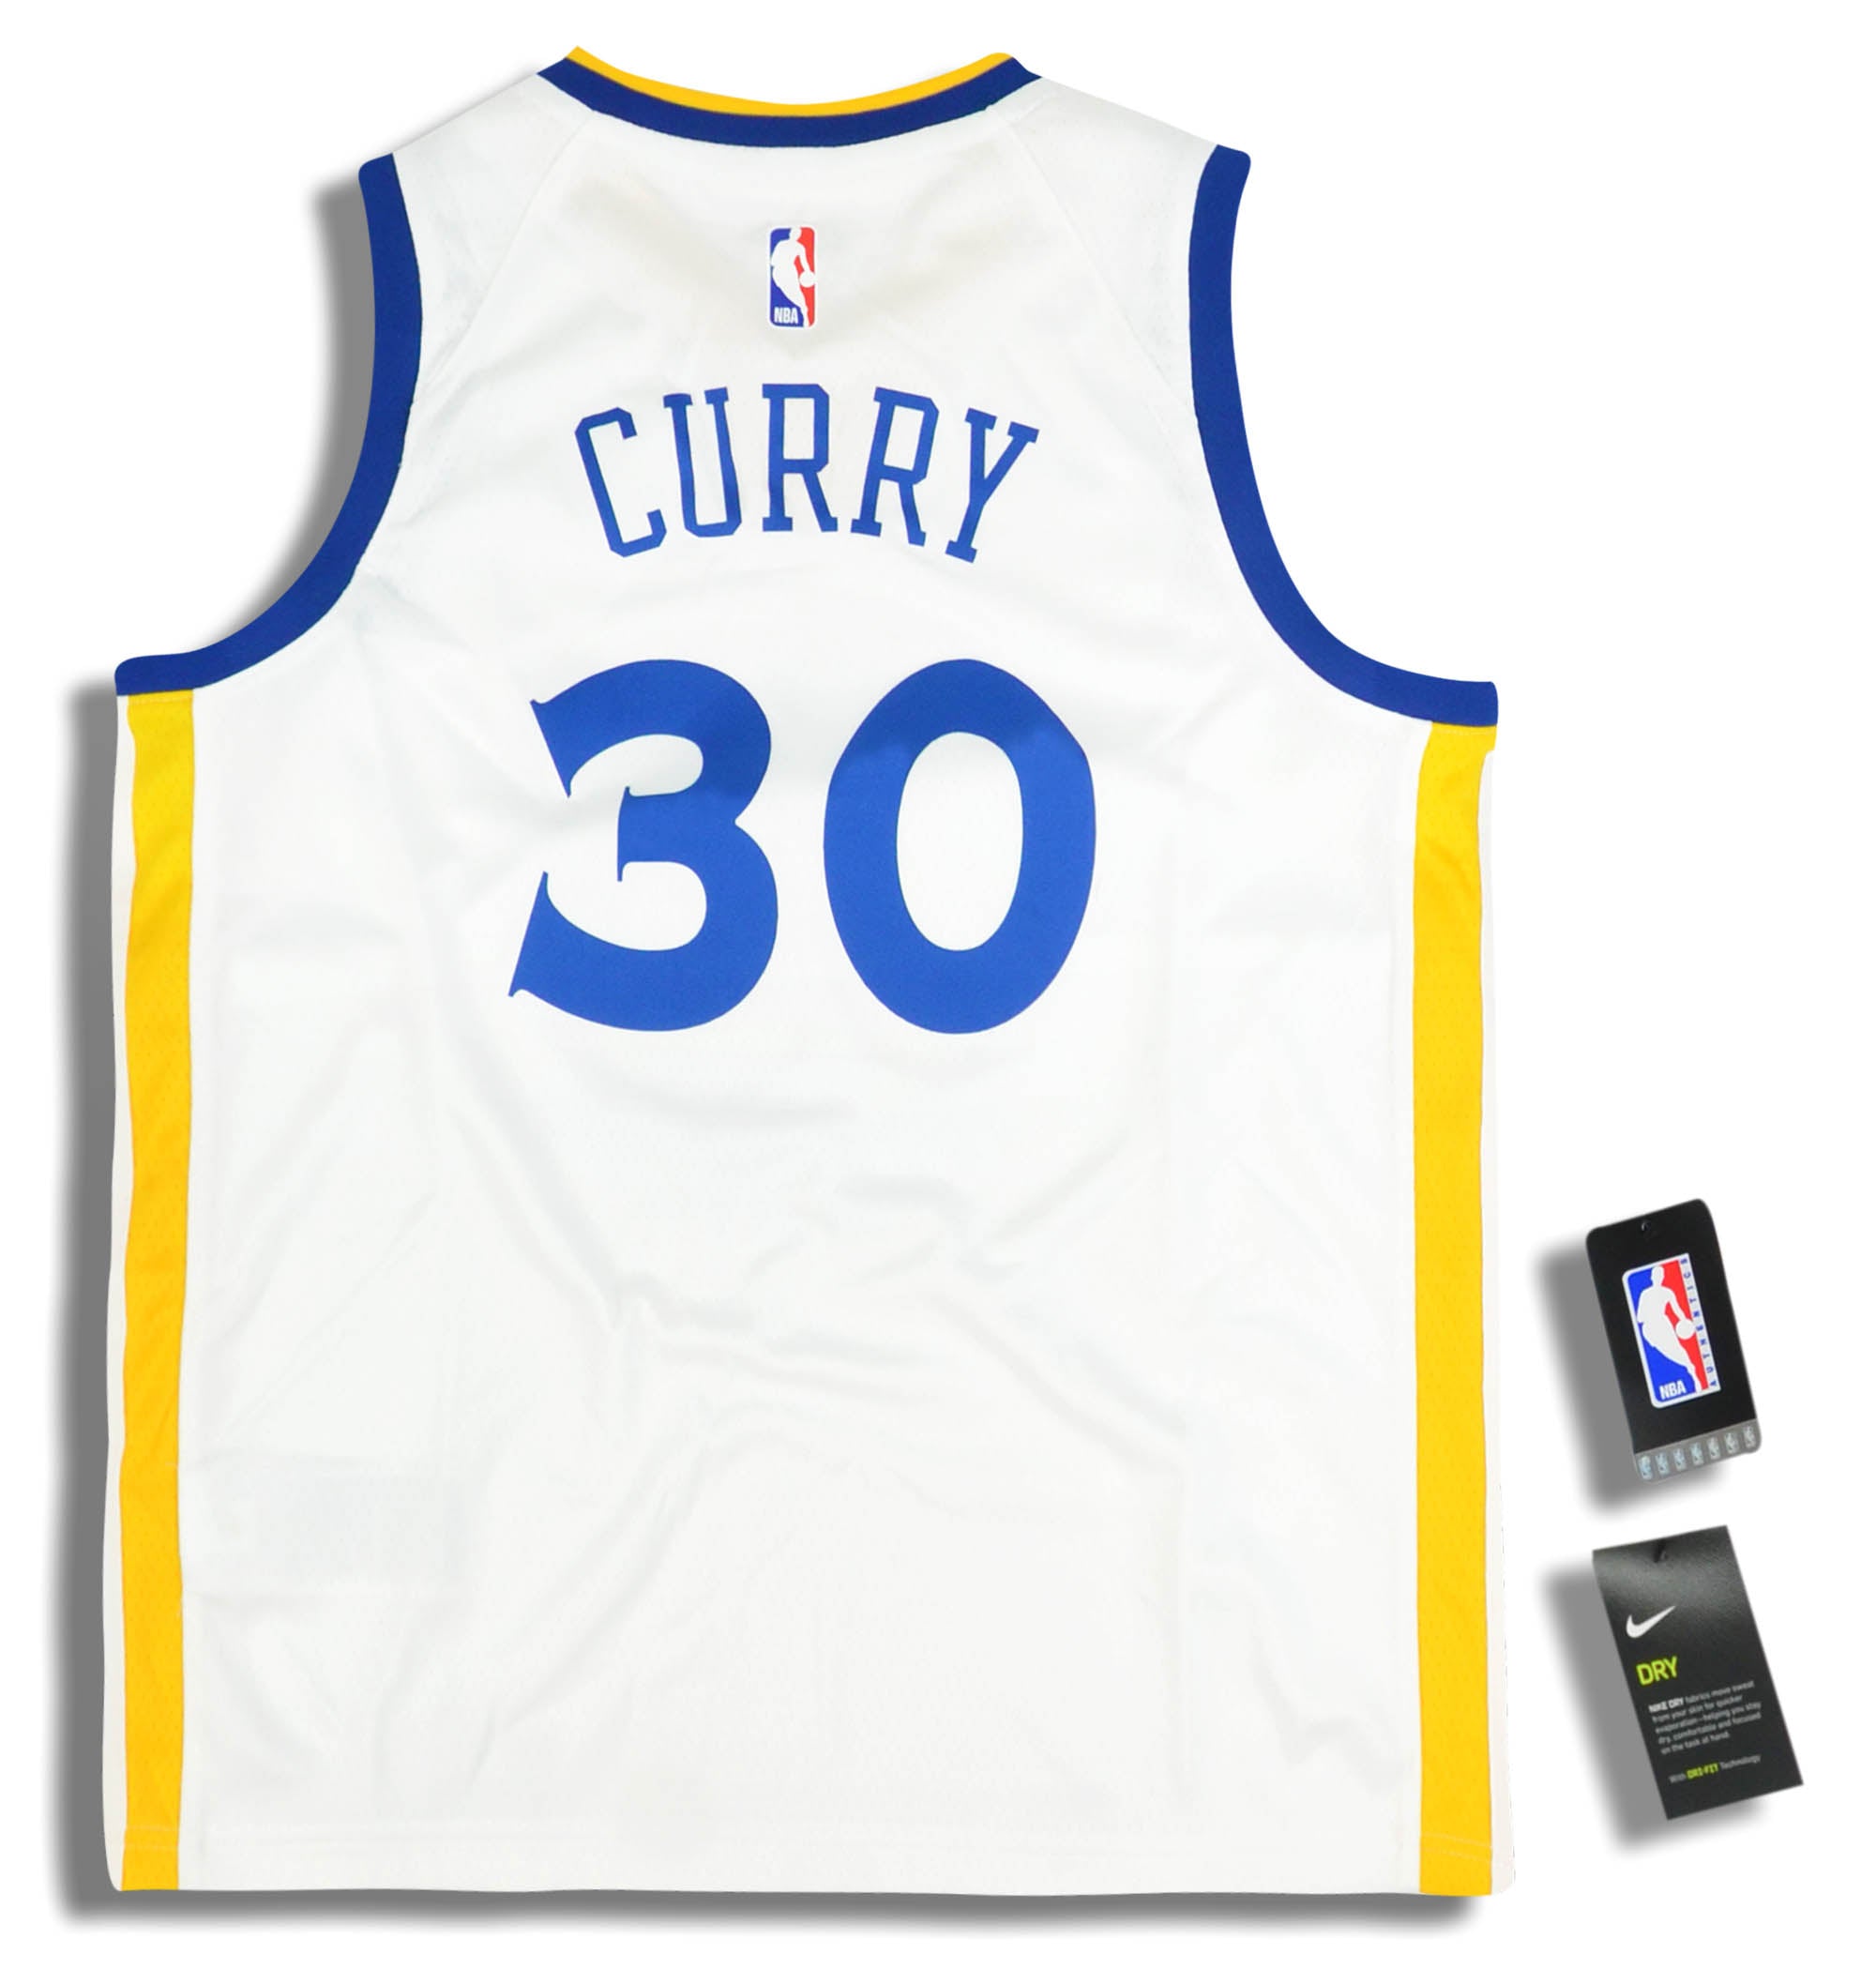 Nike Golden State Warriors Youth Classic Edition Swingman Jersey